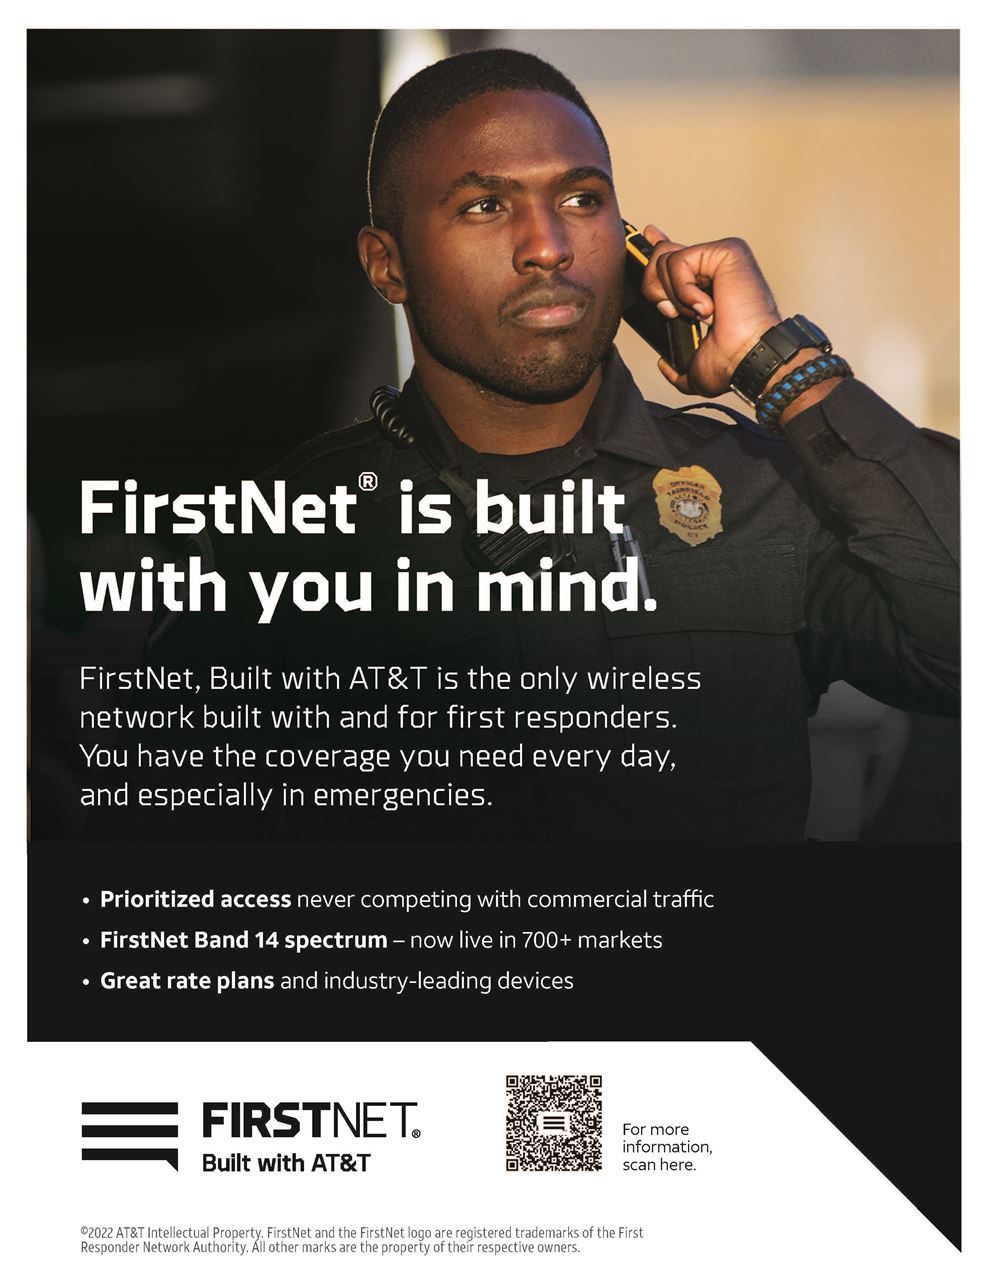 We invite KPOA Members to joint FirstNet.